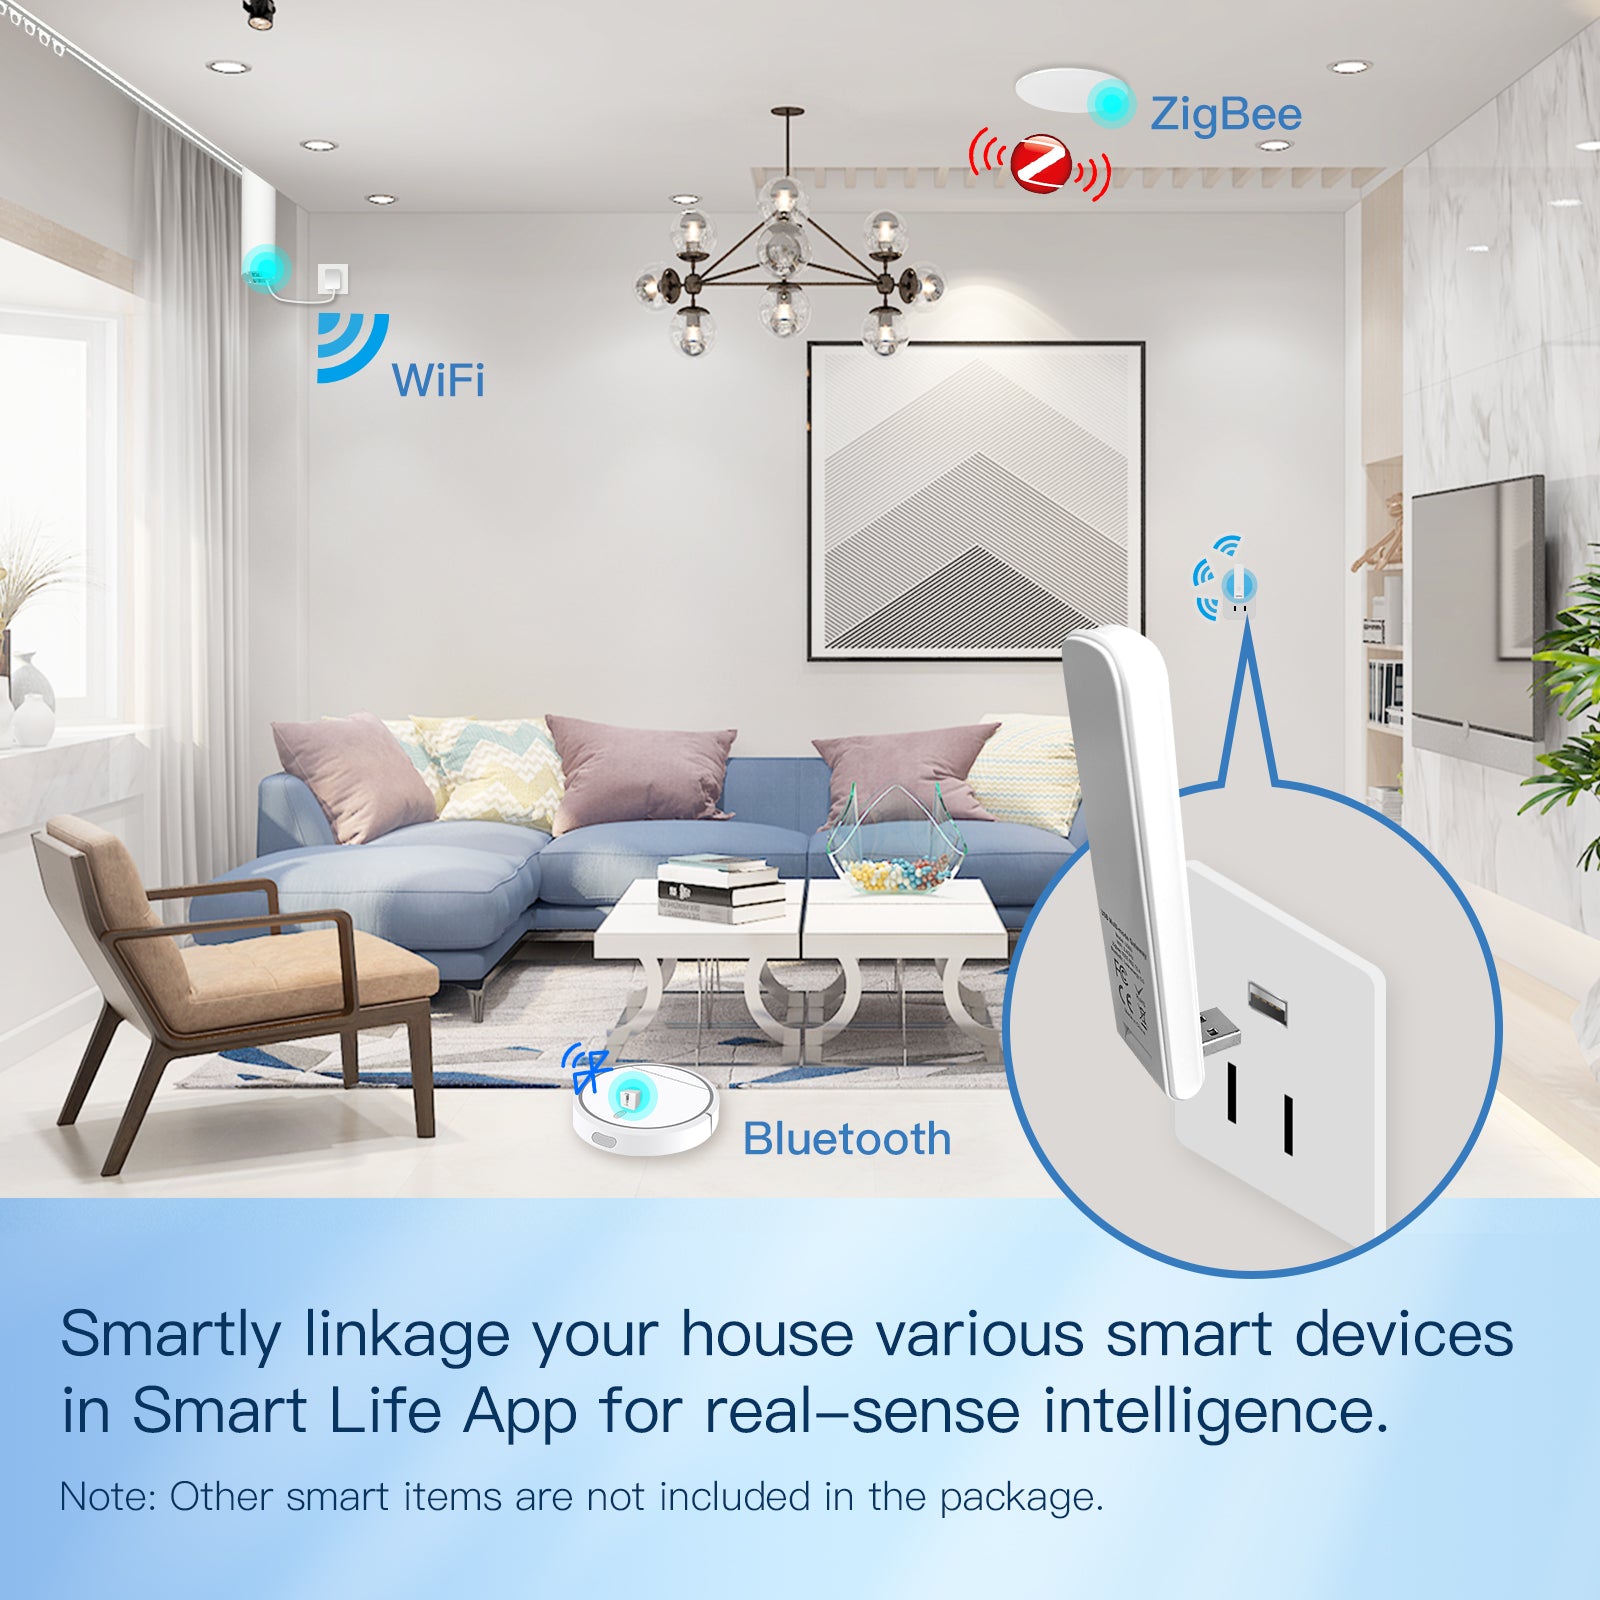 Smartly linkage your house various smart devices in Smart Life App for real-sense intelligence.